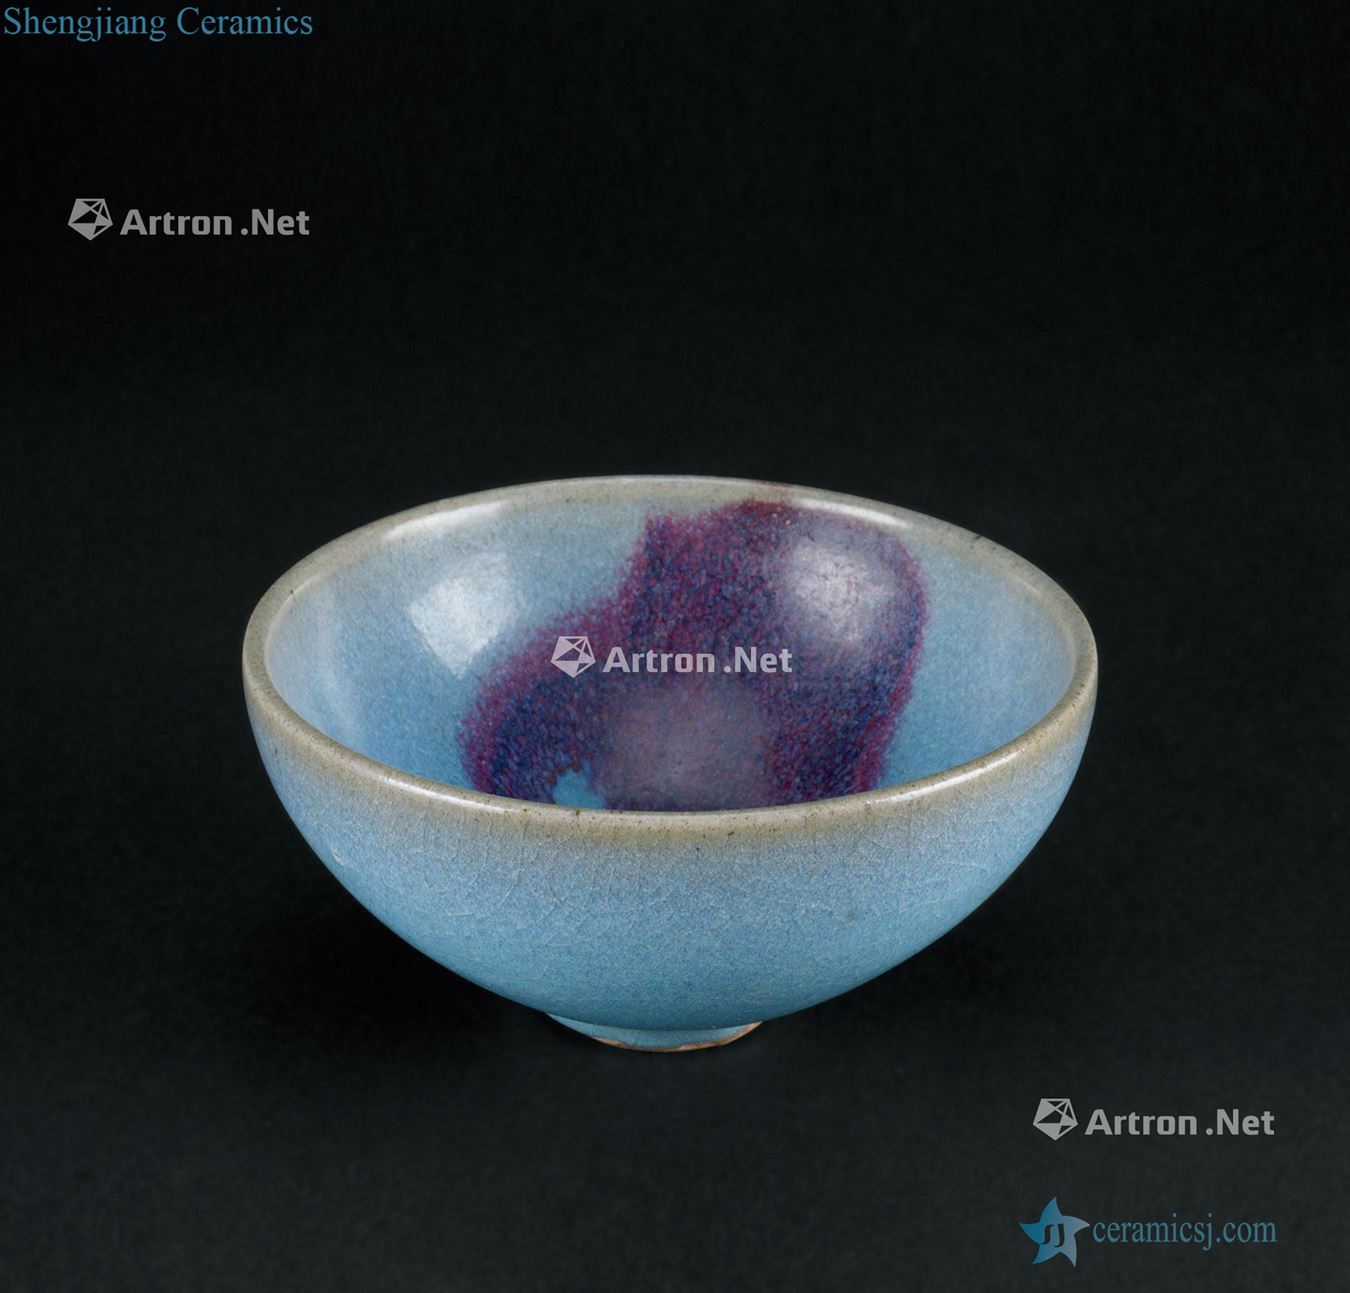 The yuan dynasty (1271-1368), purple masterpieces bowl